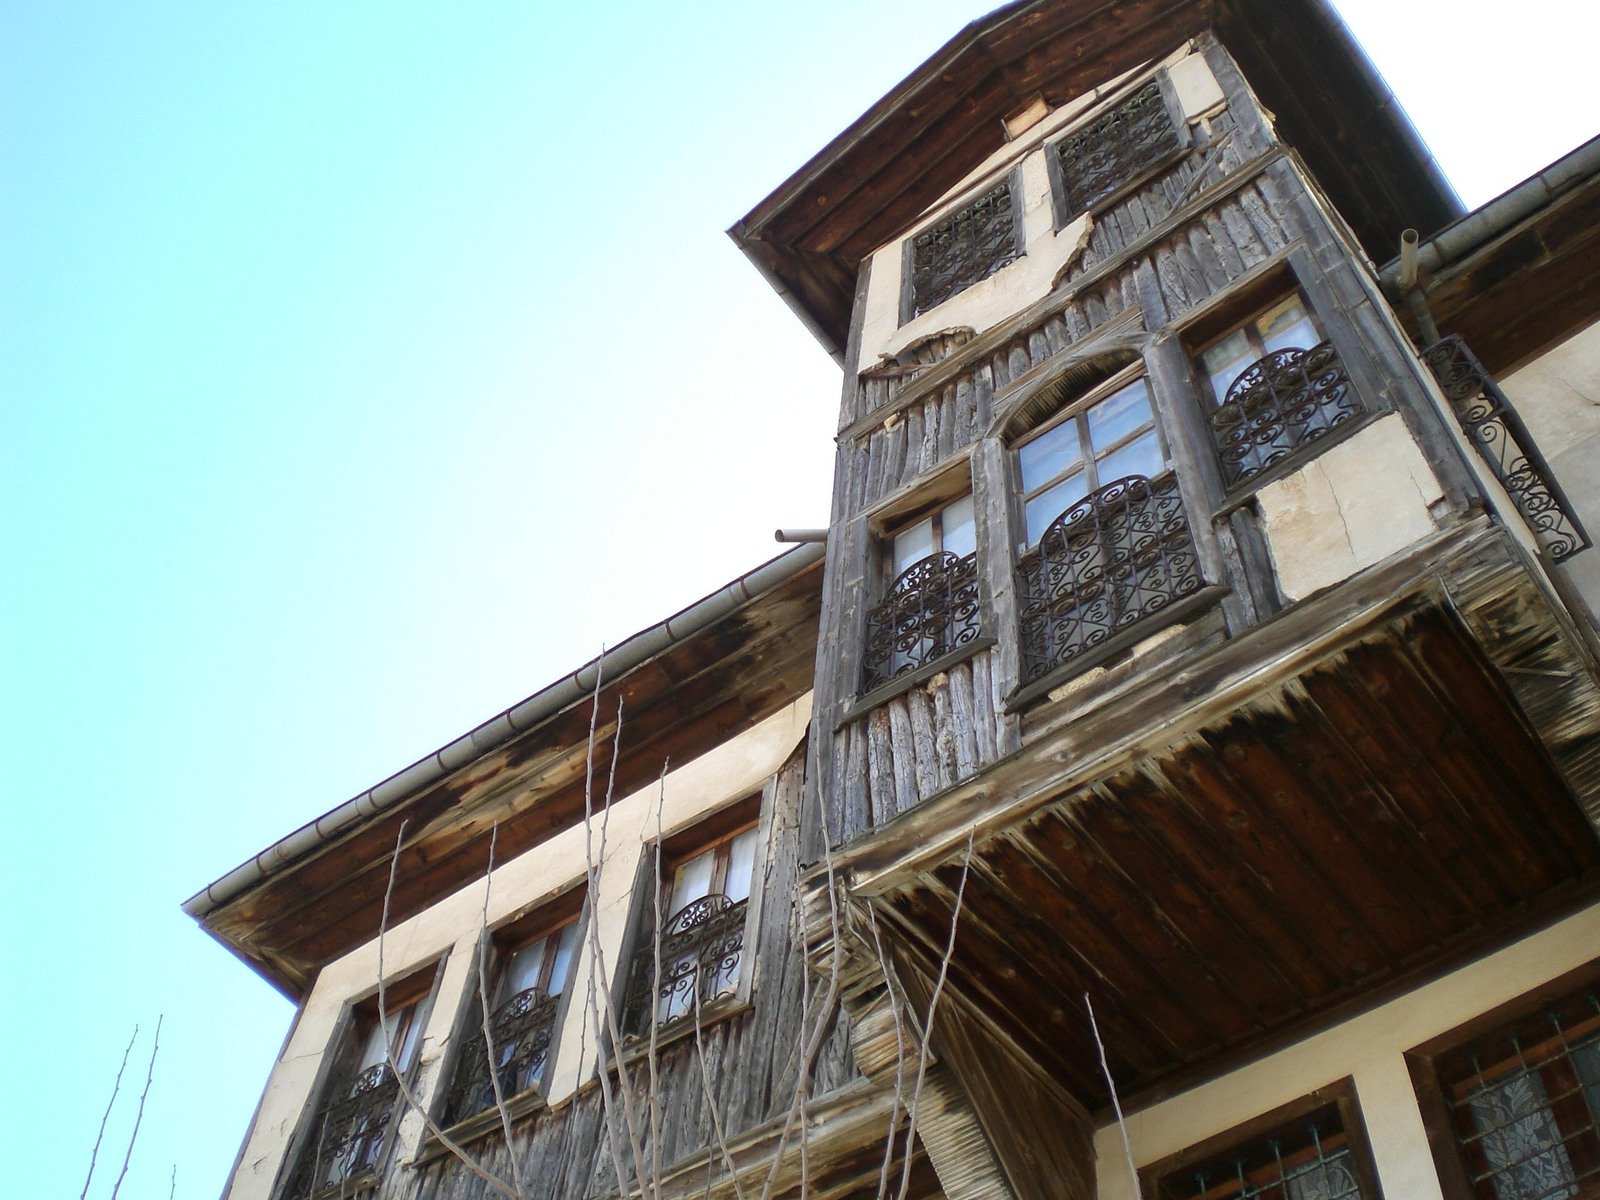 an old - fashioned windowed building with some strings attached